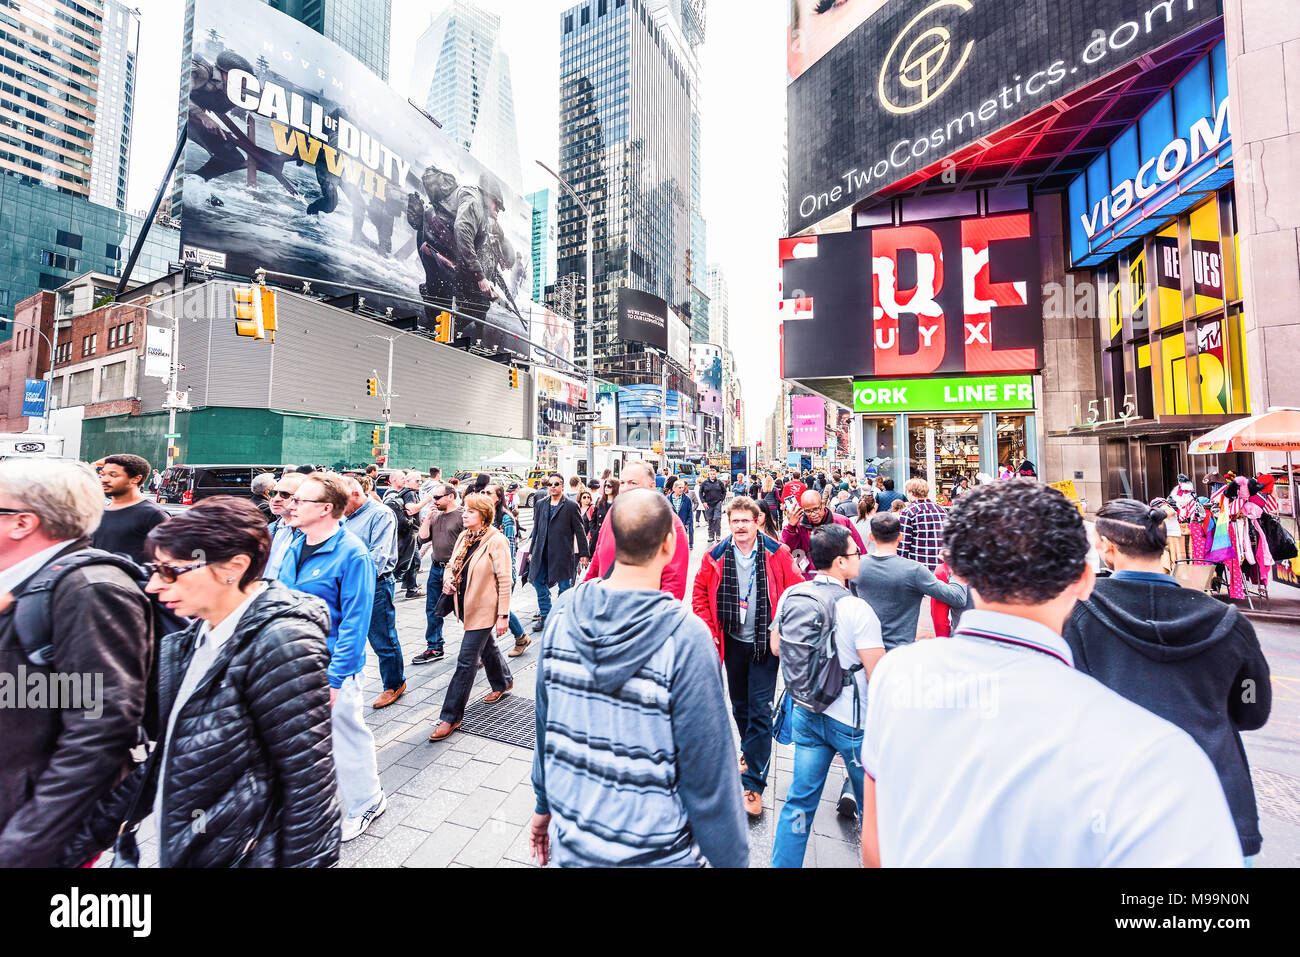 New York City, USA - October 28, 2017: Manhattan NYC buildings of midtown Times Square, Broadway avenue road, signs ads, many large huge crowd of peop Stock Photo